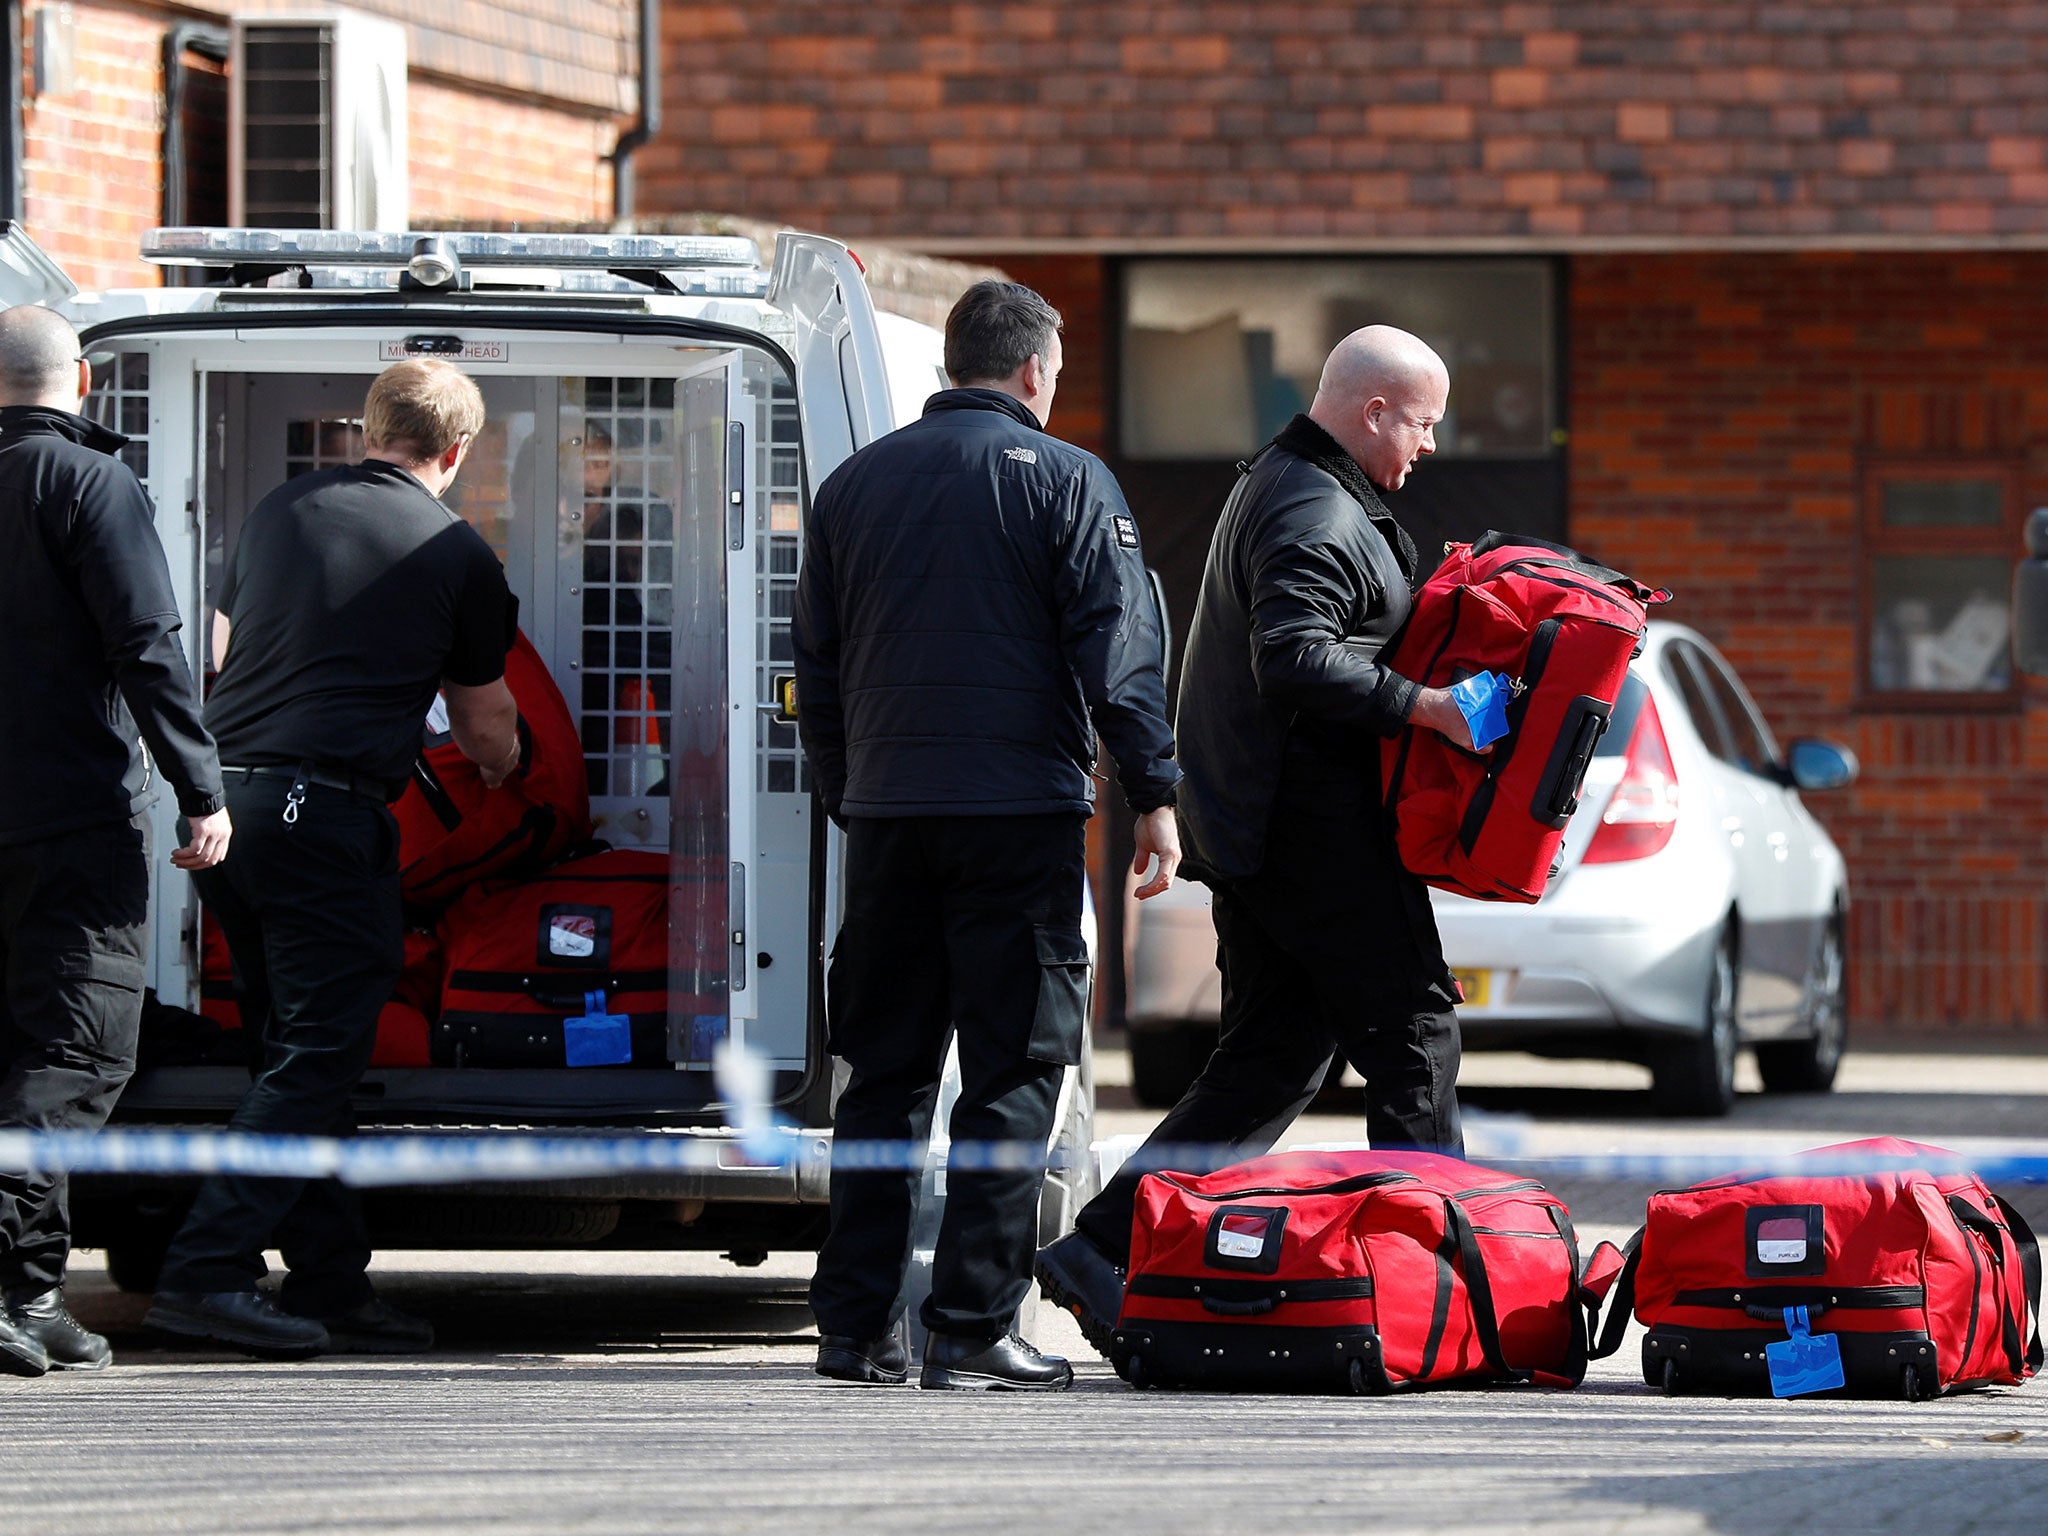 Inspectors from the Organisation for the Prohibition of Chemical Weapons (OPCW) arrive to begin work at the scene of the nerve agent attack (Reuters/Peter Nicholls)